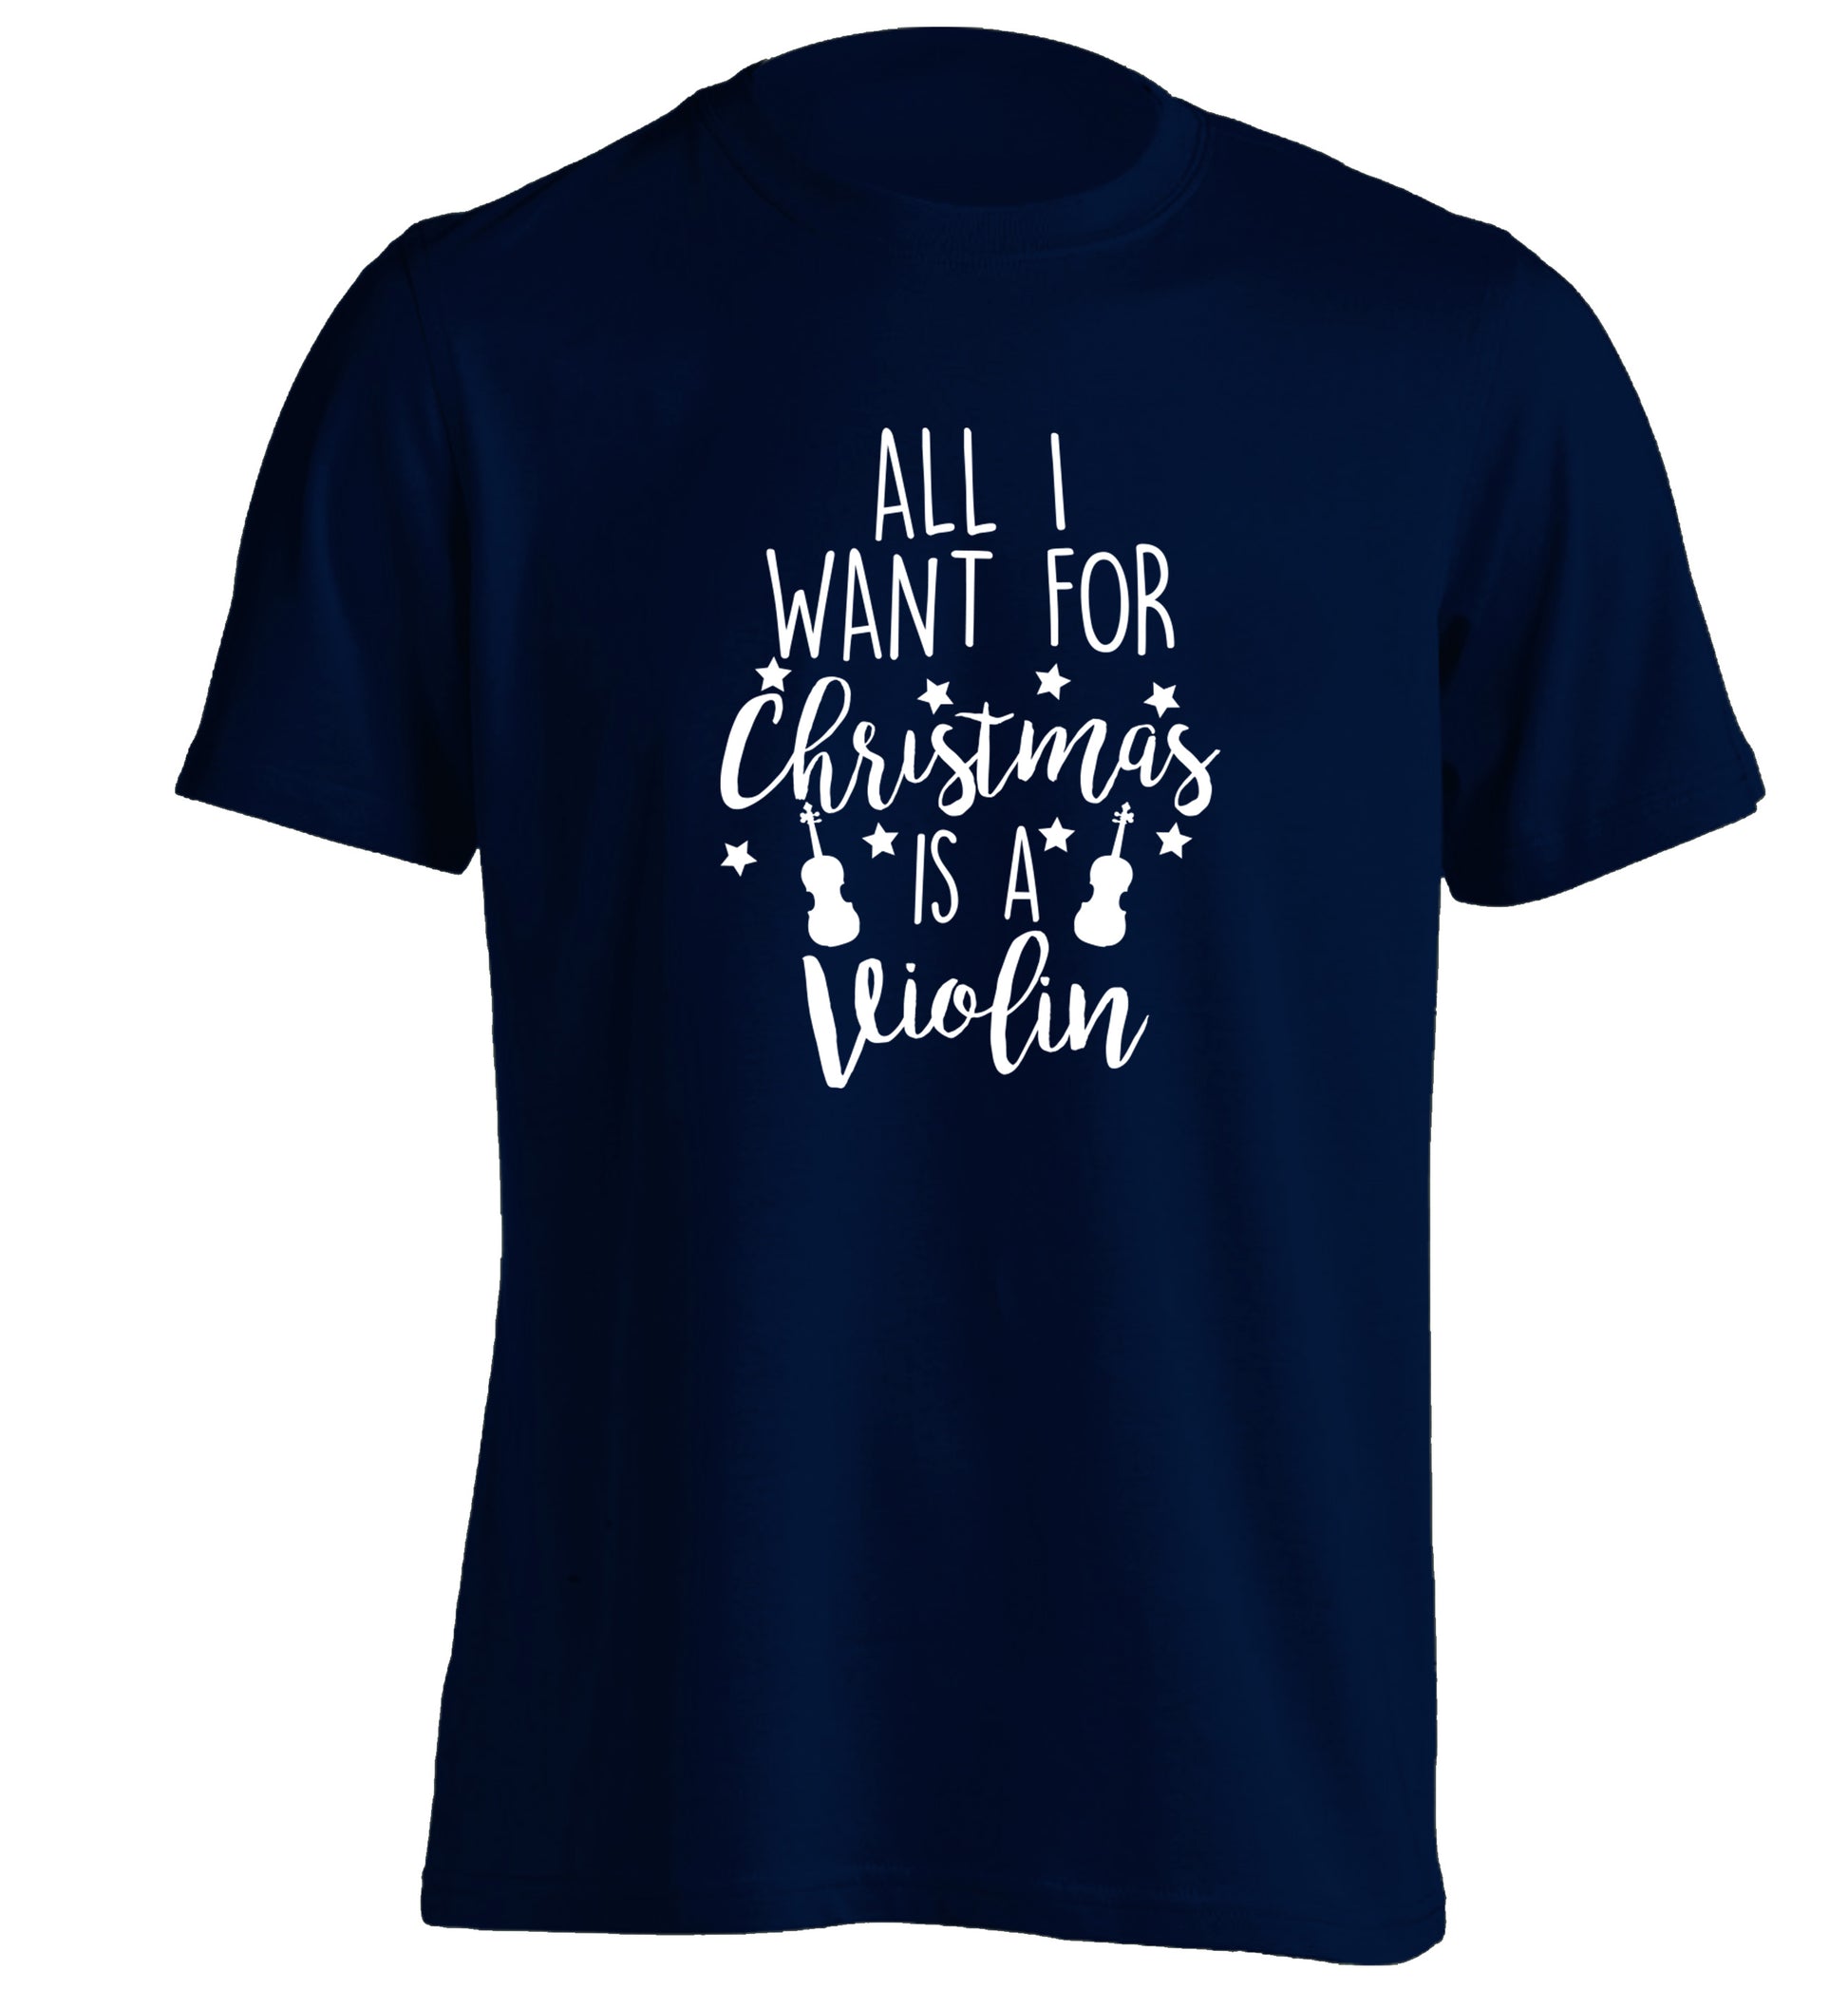 All I Want For Christmas is a Violin adults unisex navy Tshirt 2XL